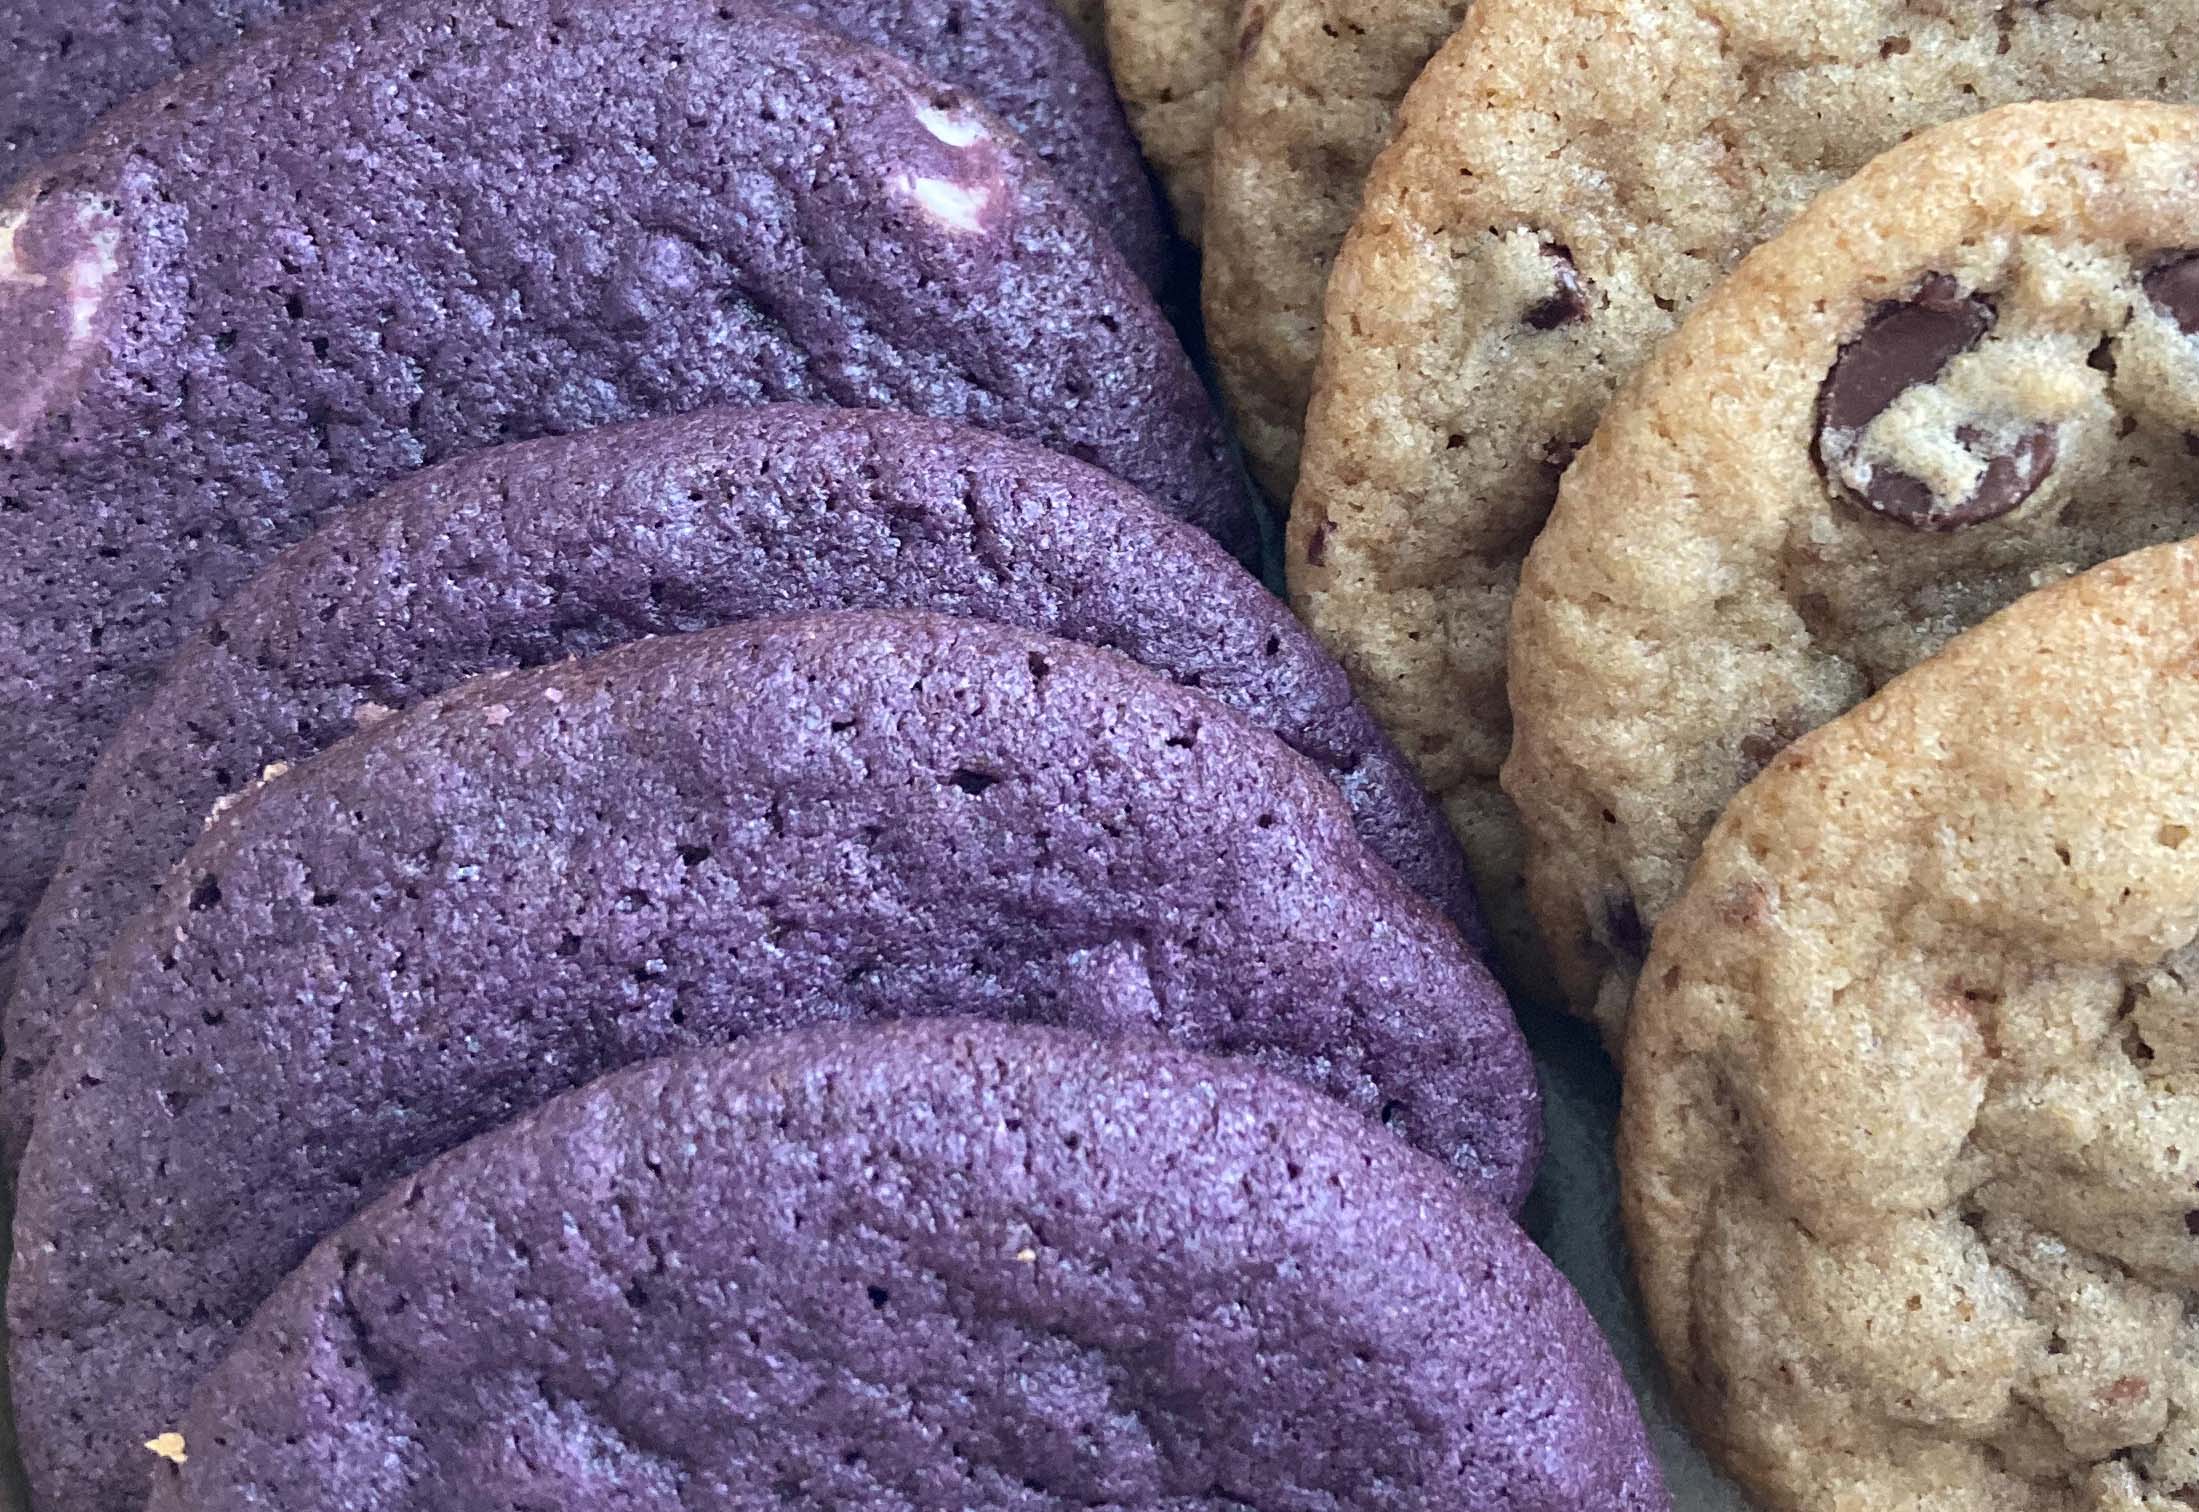 Close-up photo of a box of chocolate chip cookies, with a row of bright purple ube white chocolate cookies on the left and more conventional-looking chocolate chip cookies on the right.